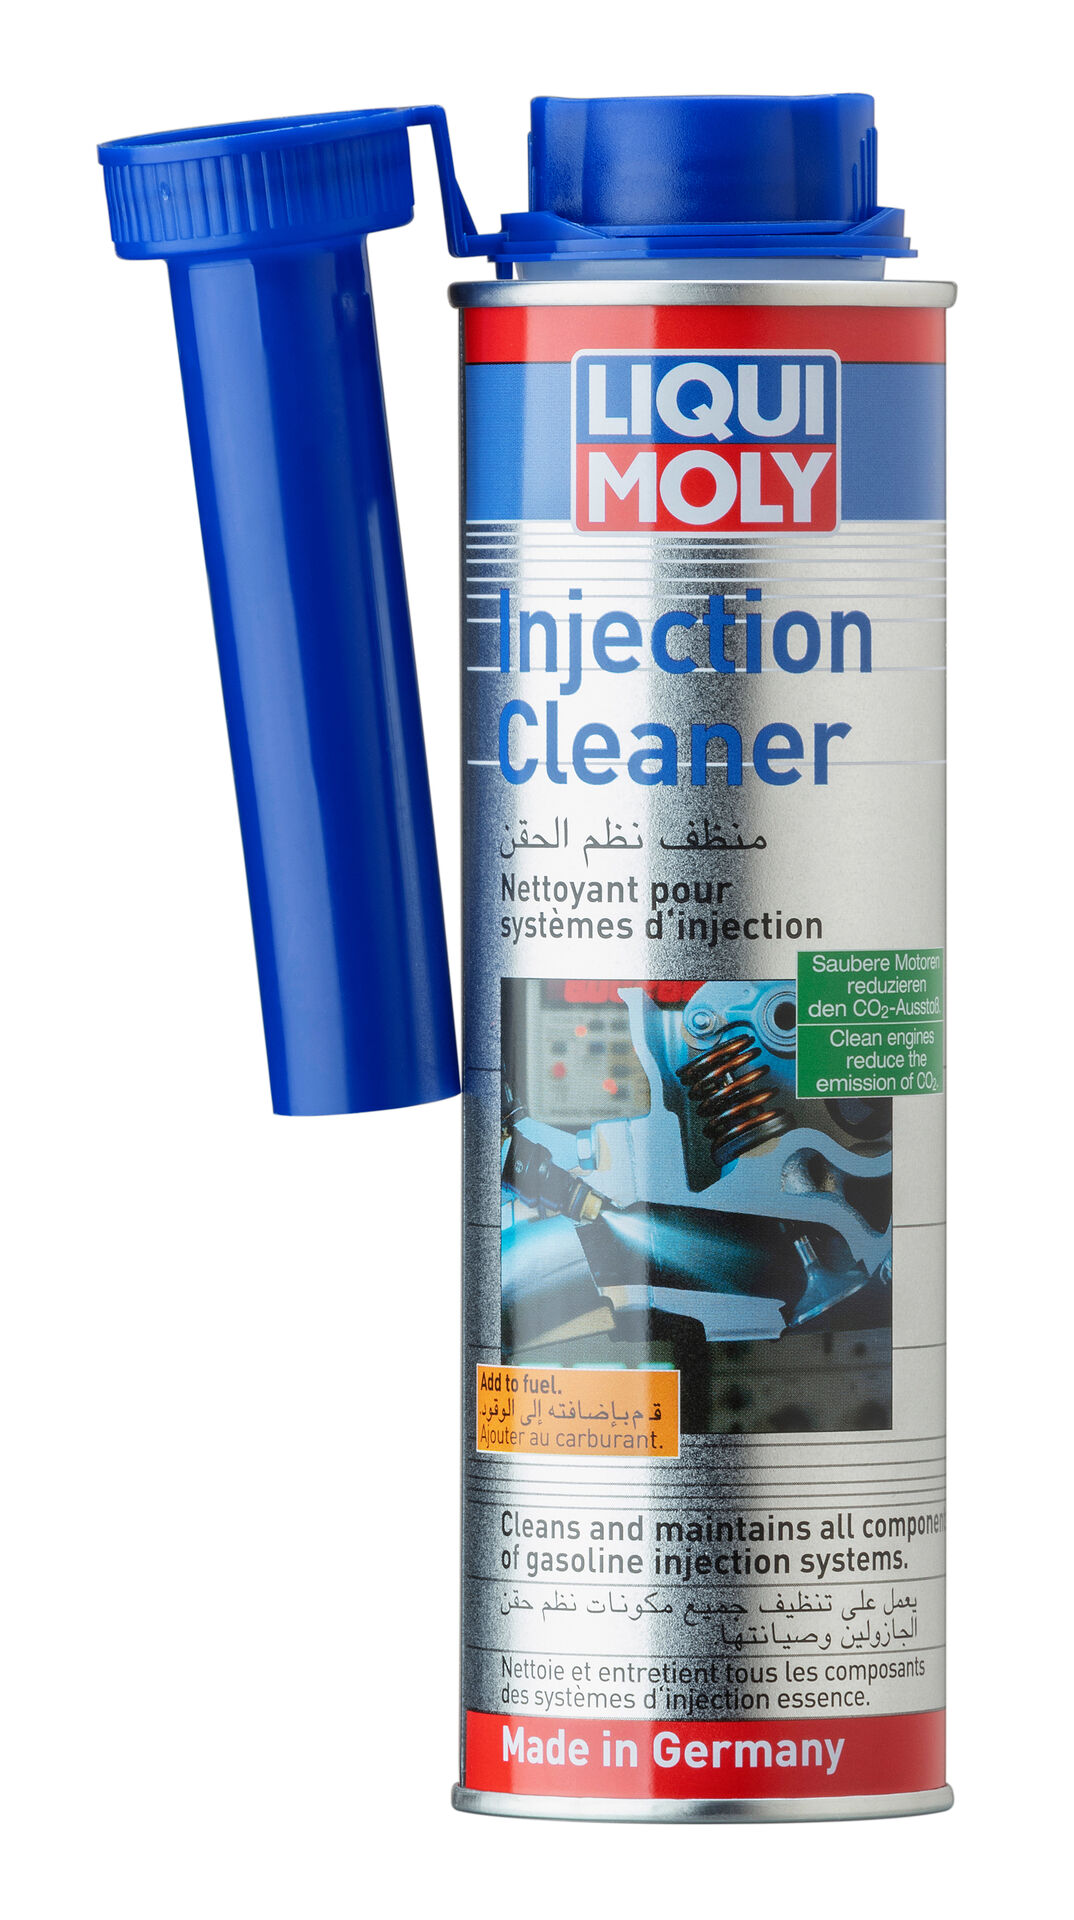 How to use Liqui Moly Injection Cleaner 